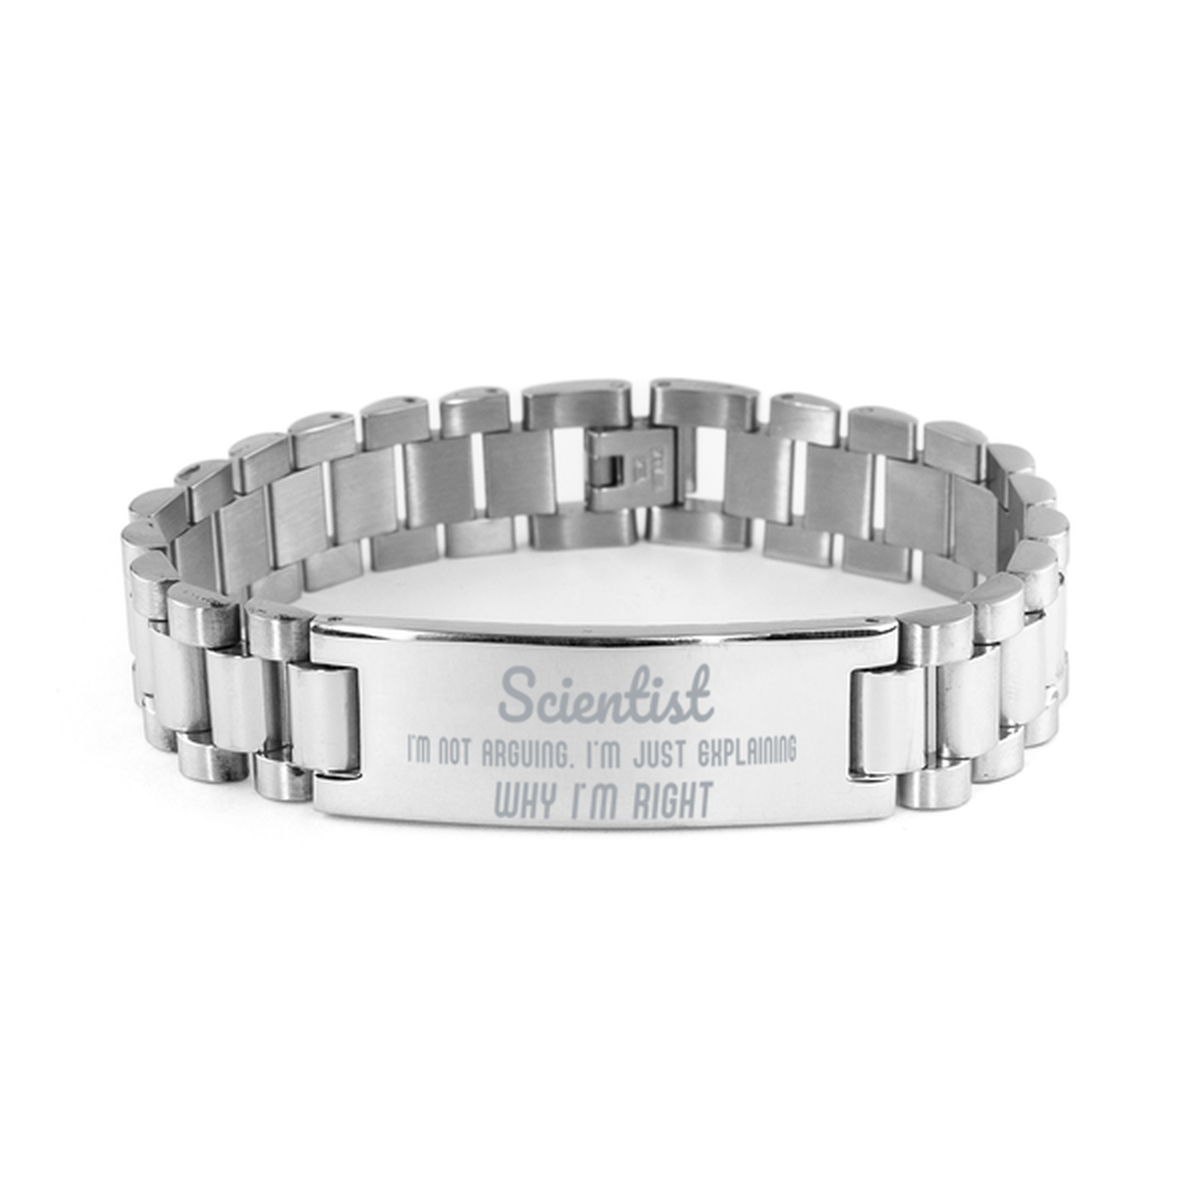 Scientist I'm not Arguing. I'm Just Explaining Why I'm RIGHT Ladder Stainless Steel Bracelet, Graduation Birthday Christmas Scientist Gifts For Scientist Funny Saying Quote Present for Men Women Coworker